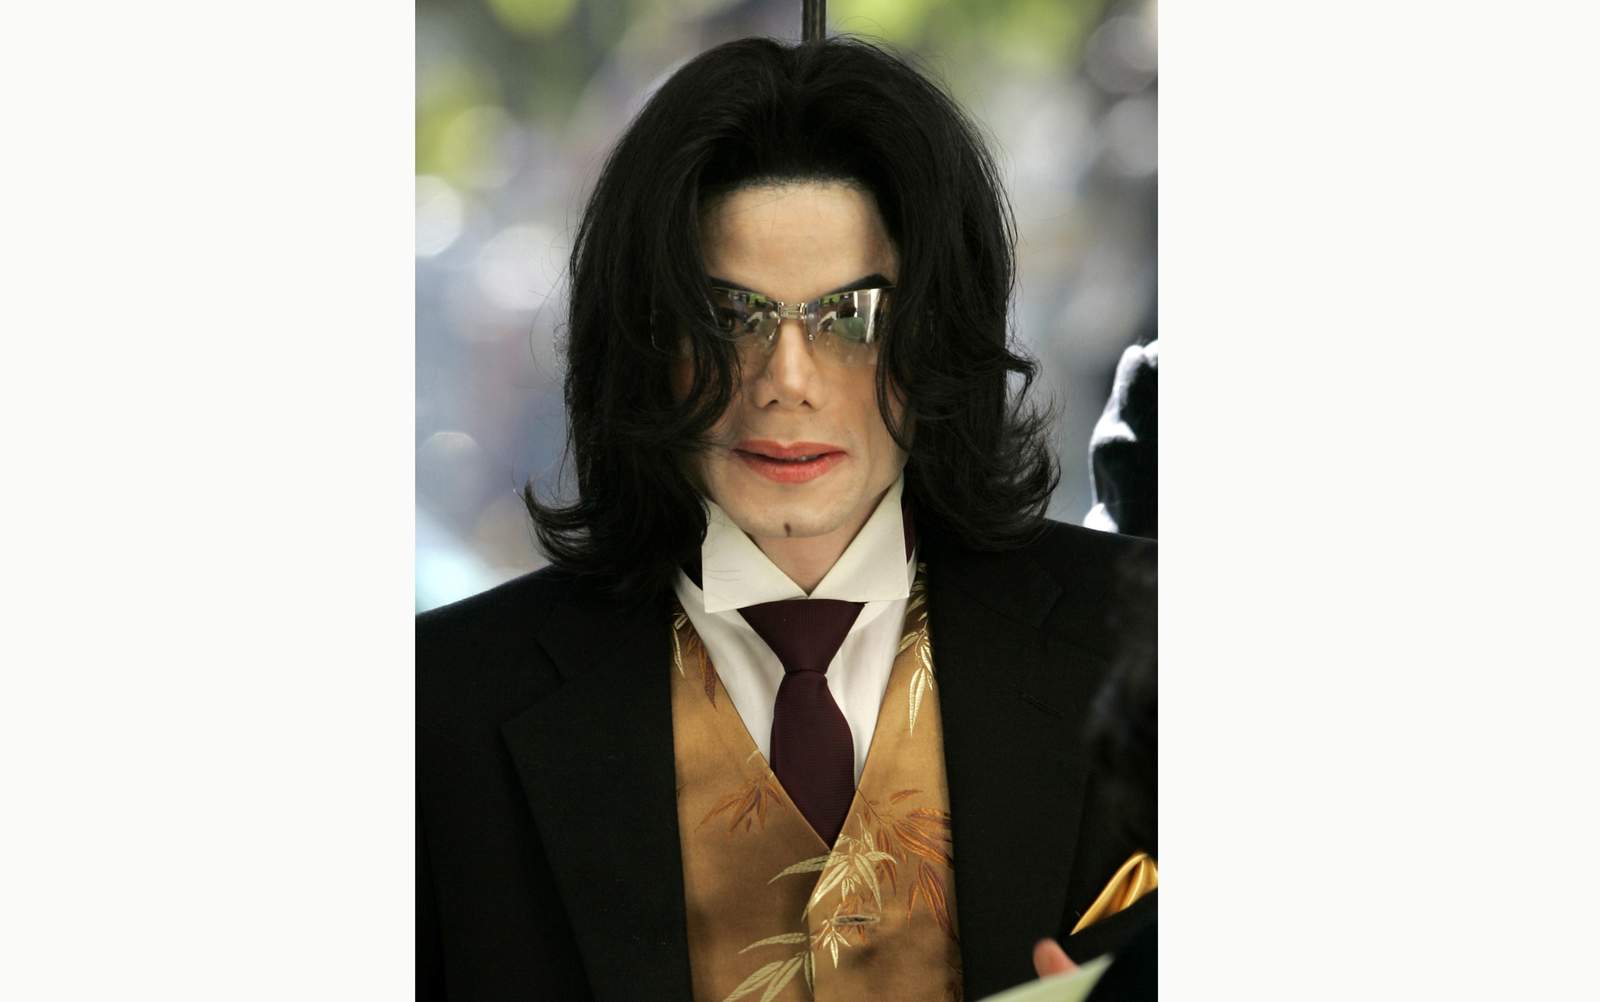 Appeals court sends 'Leaving Neverland' fight to arbitration